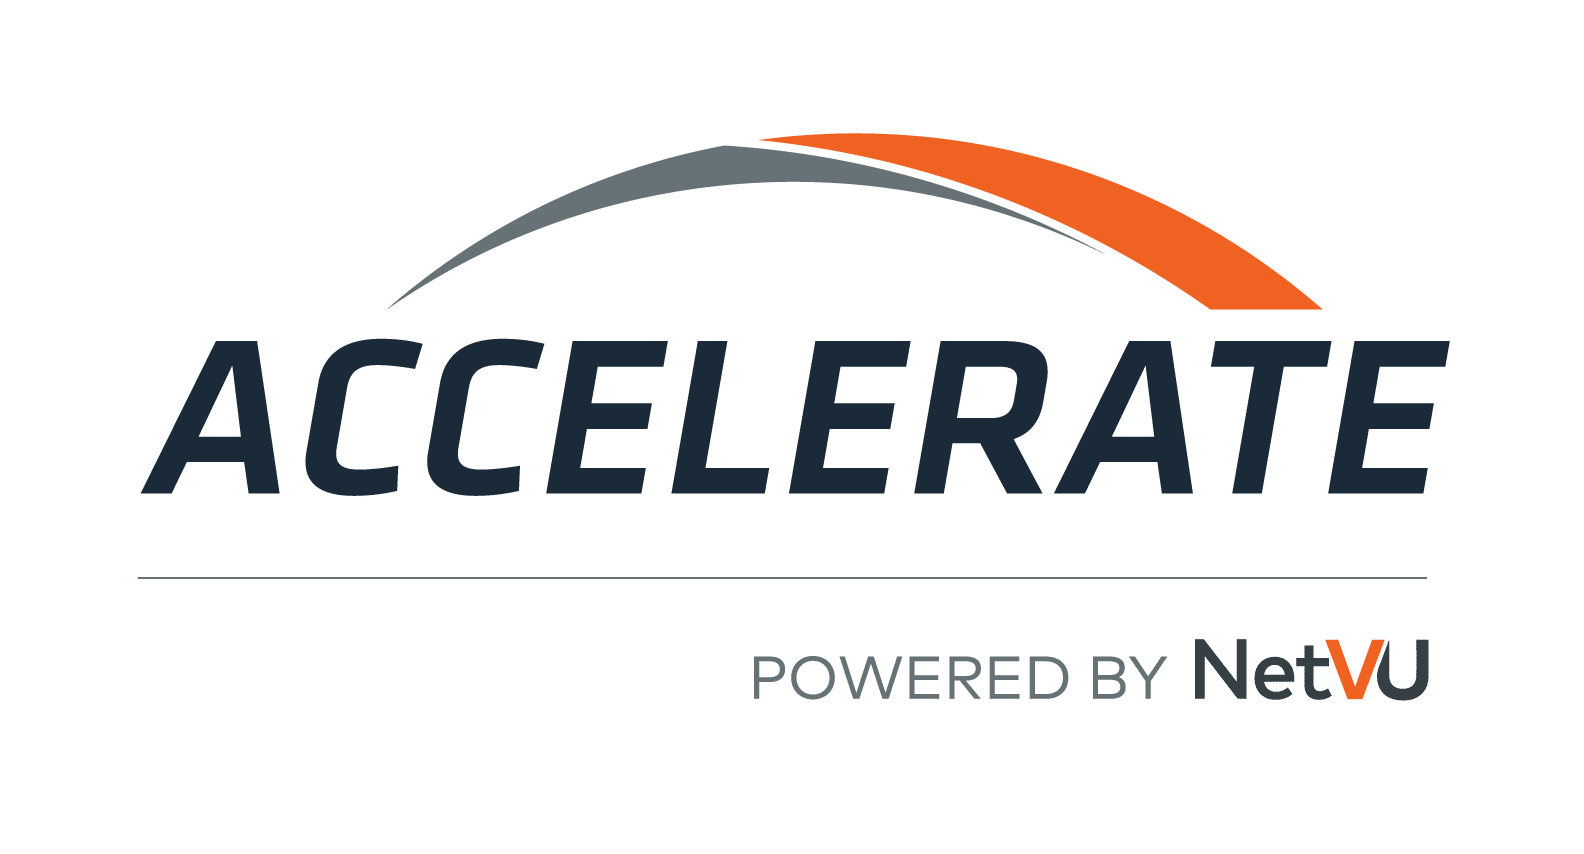 Accelerate Powered by Netvu